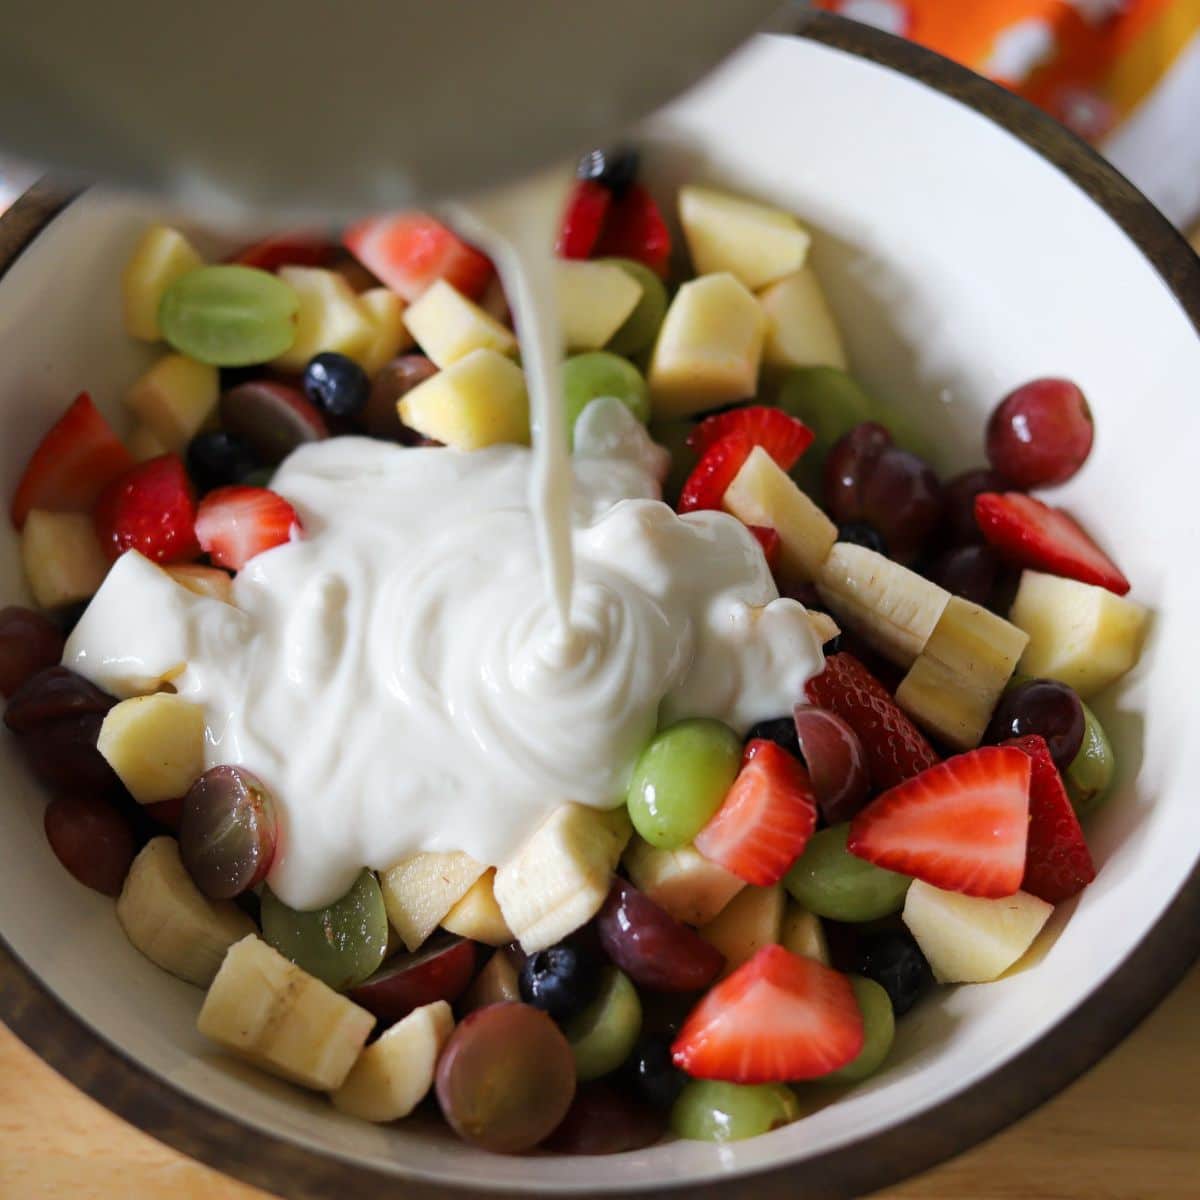 honey yogurt being poured over sliced fruit in a large bowl.